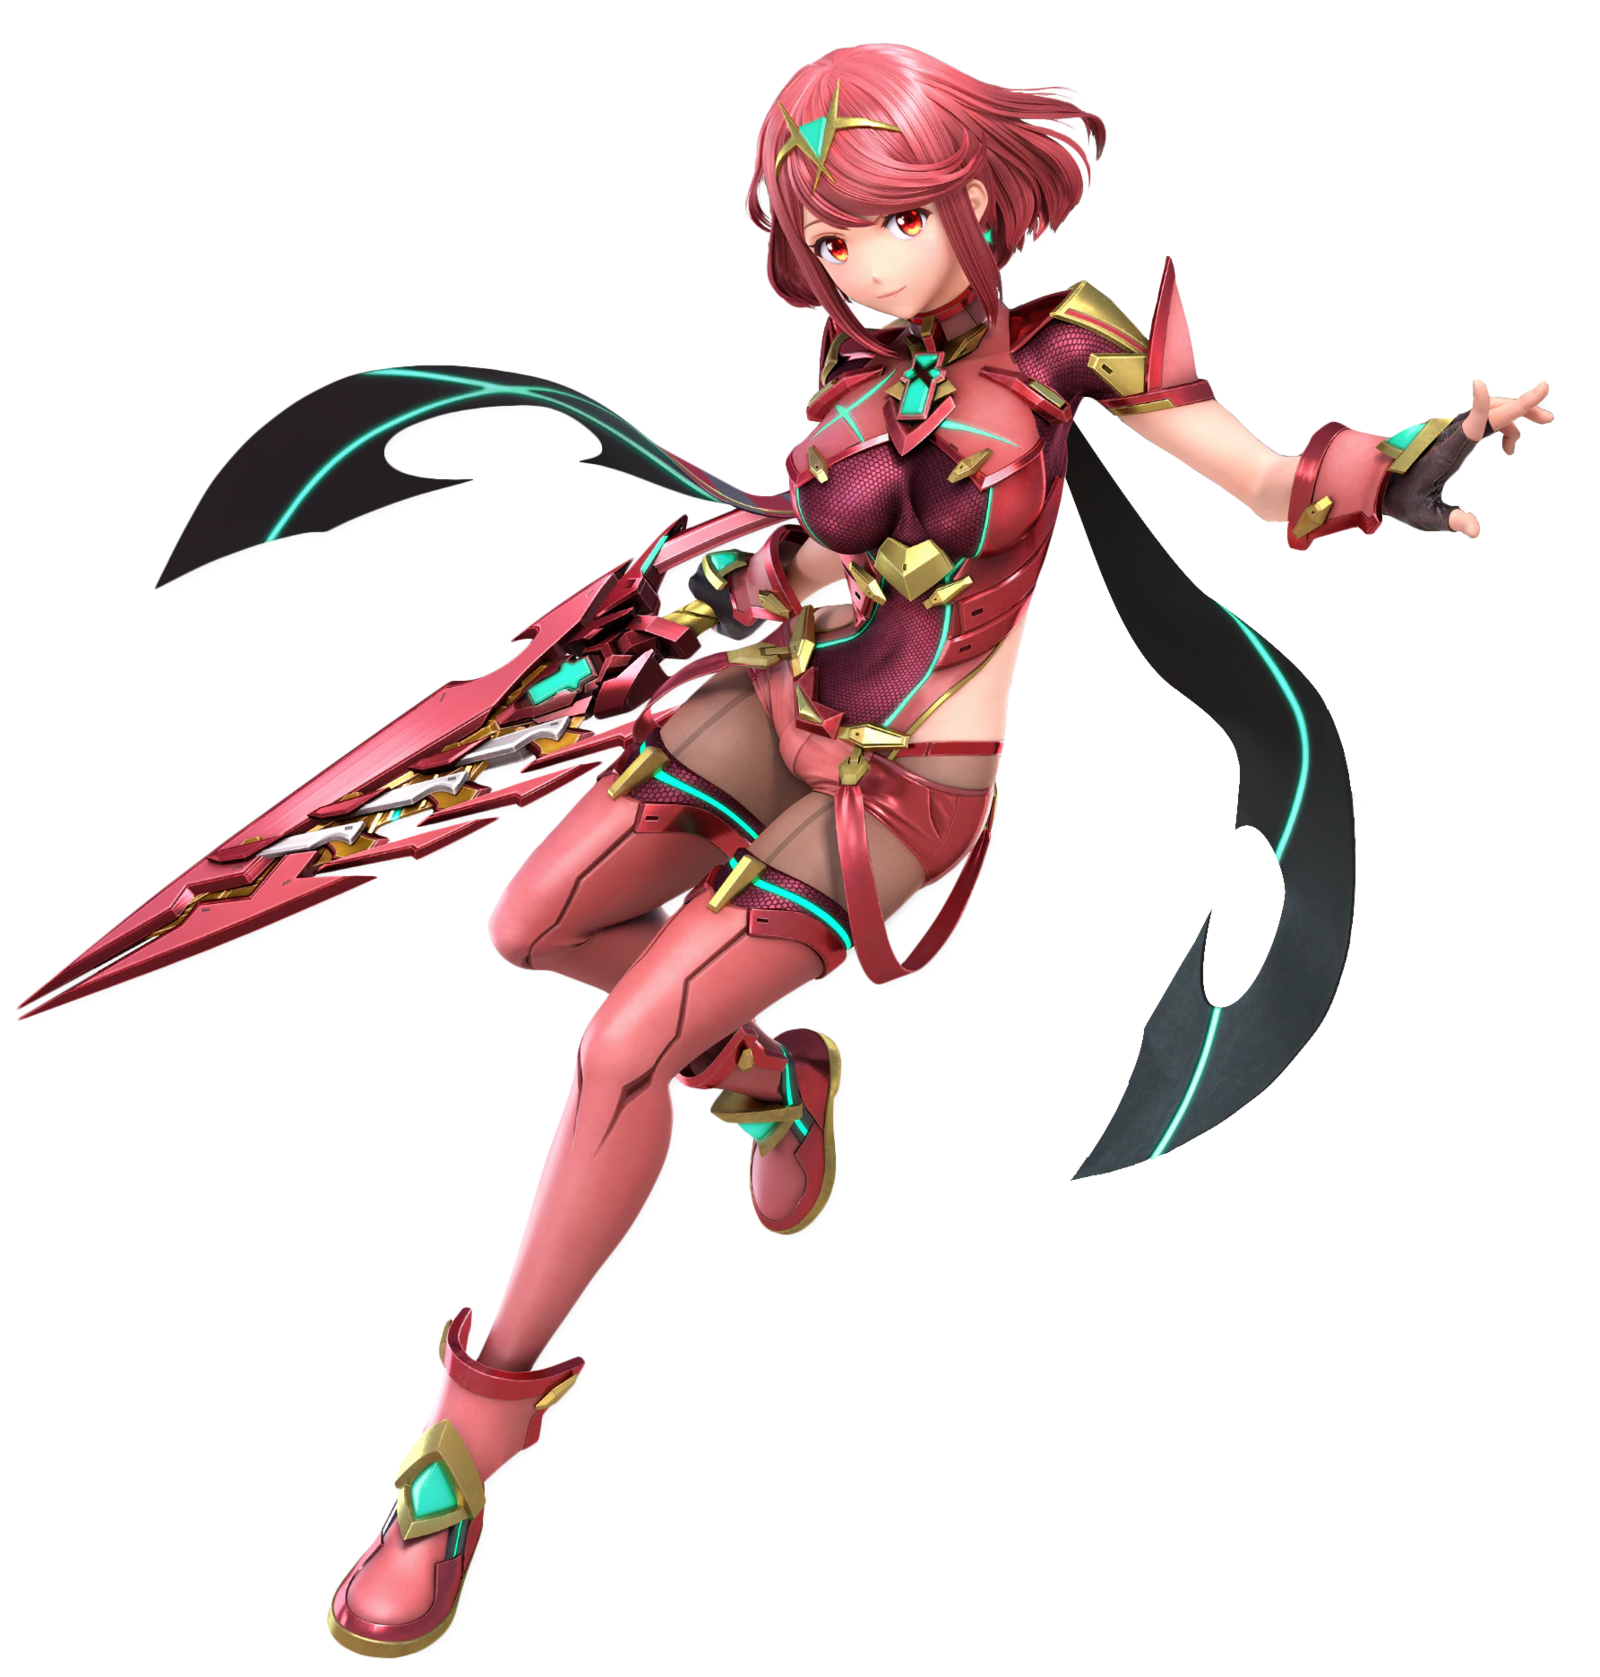 How to counter Pyra with Mario in Super Smash Bros. Ultimate